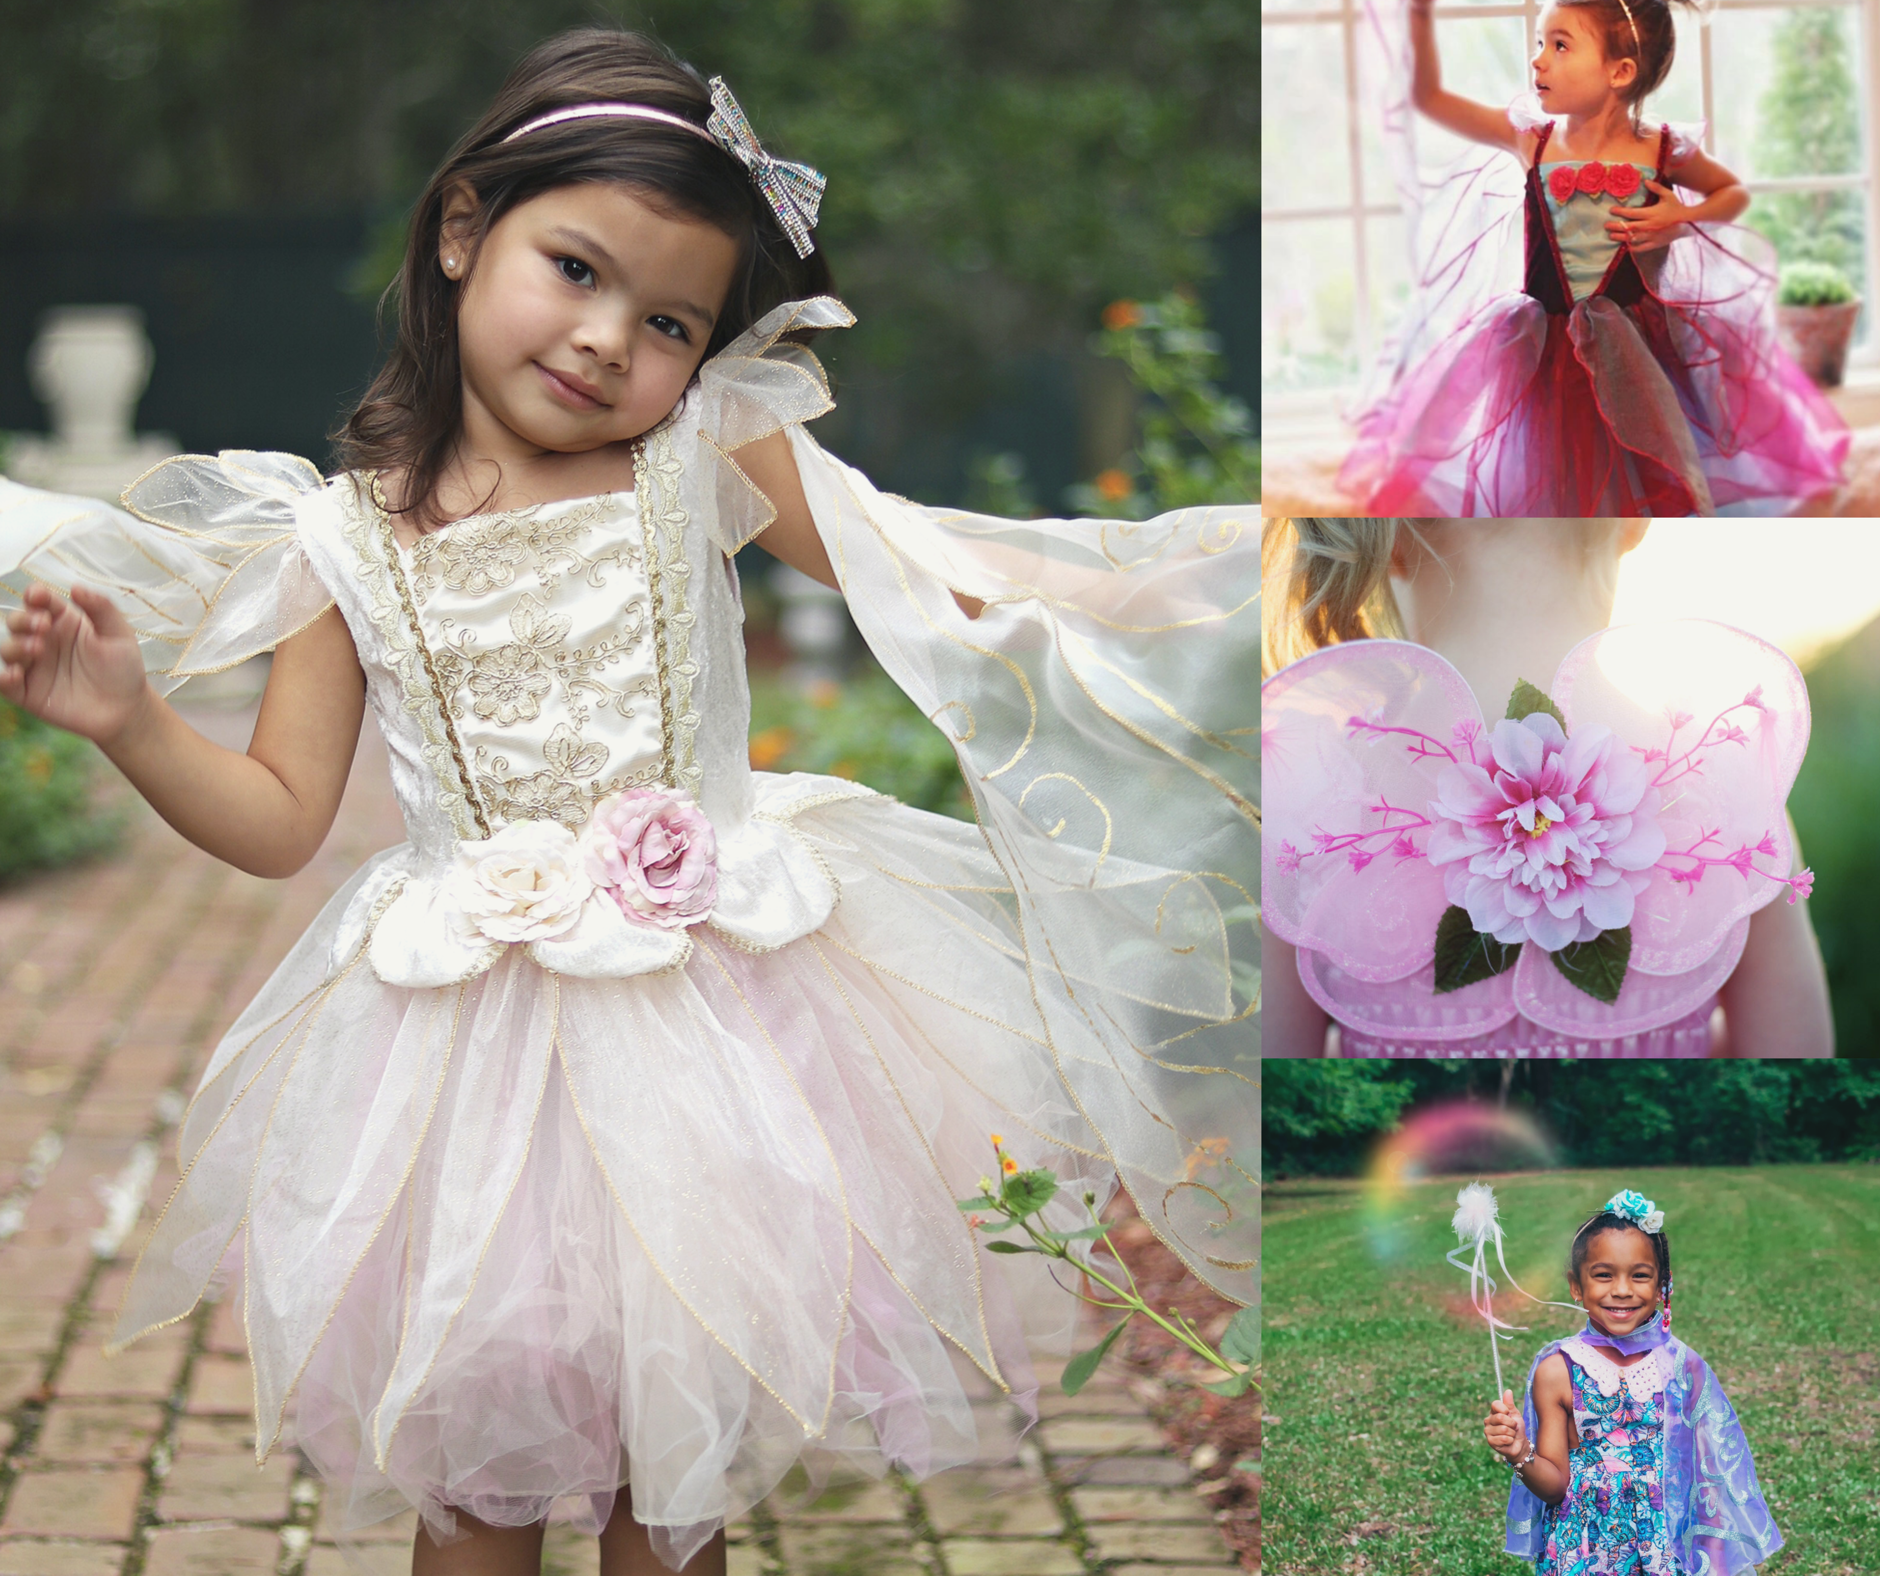 Our 5 favourite pretend-play looks for your little fairy princess!